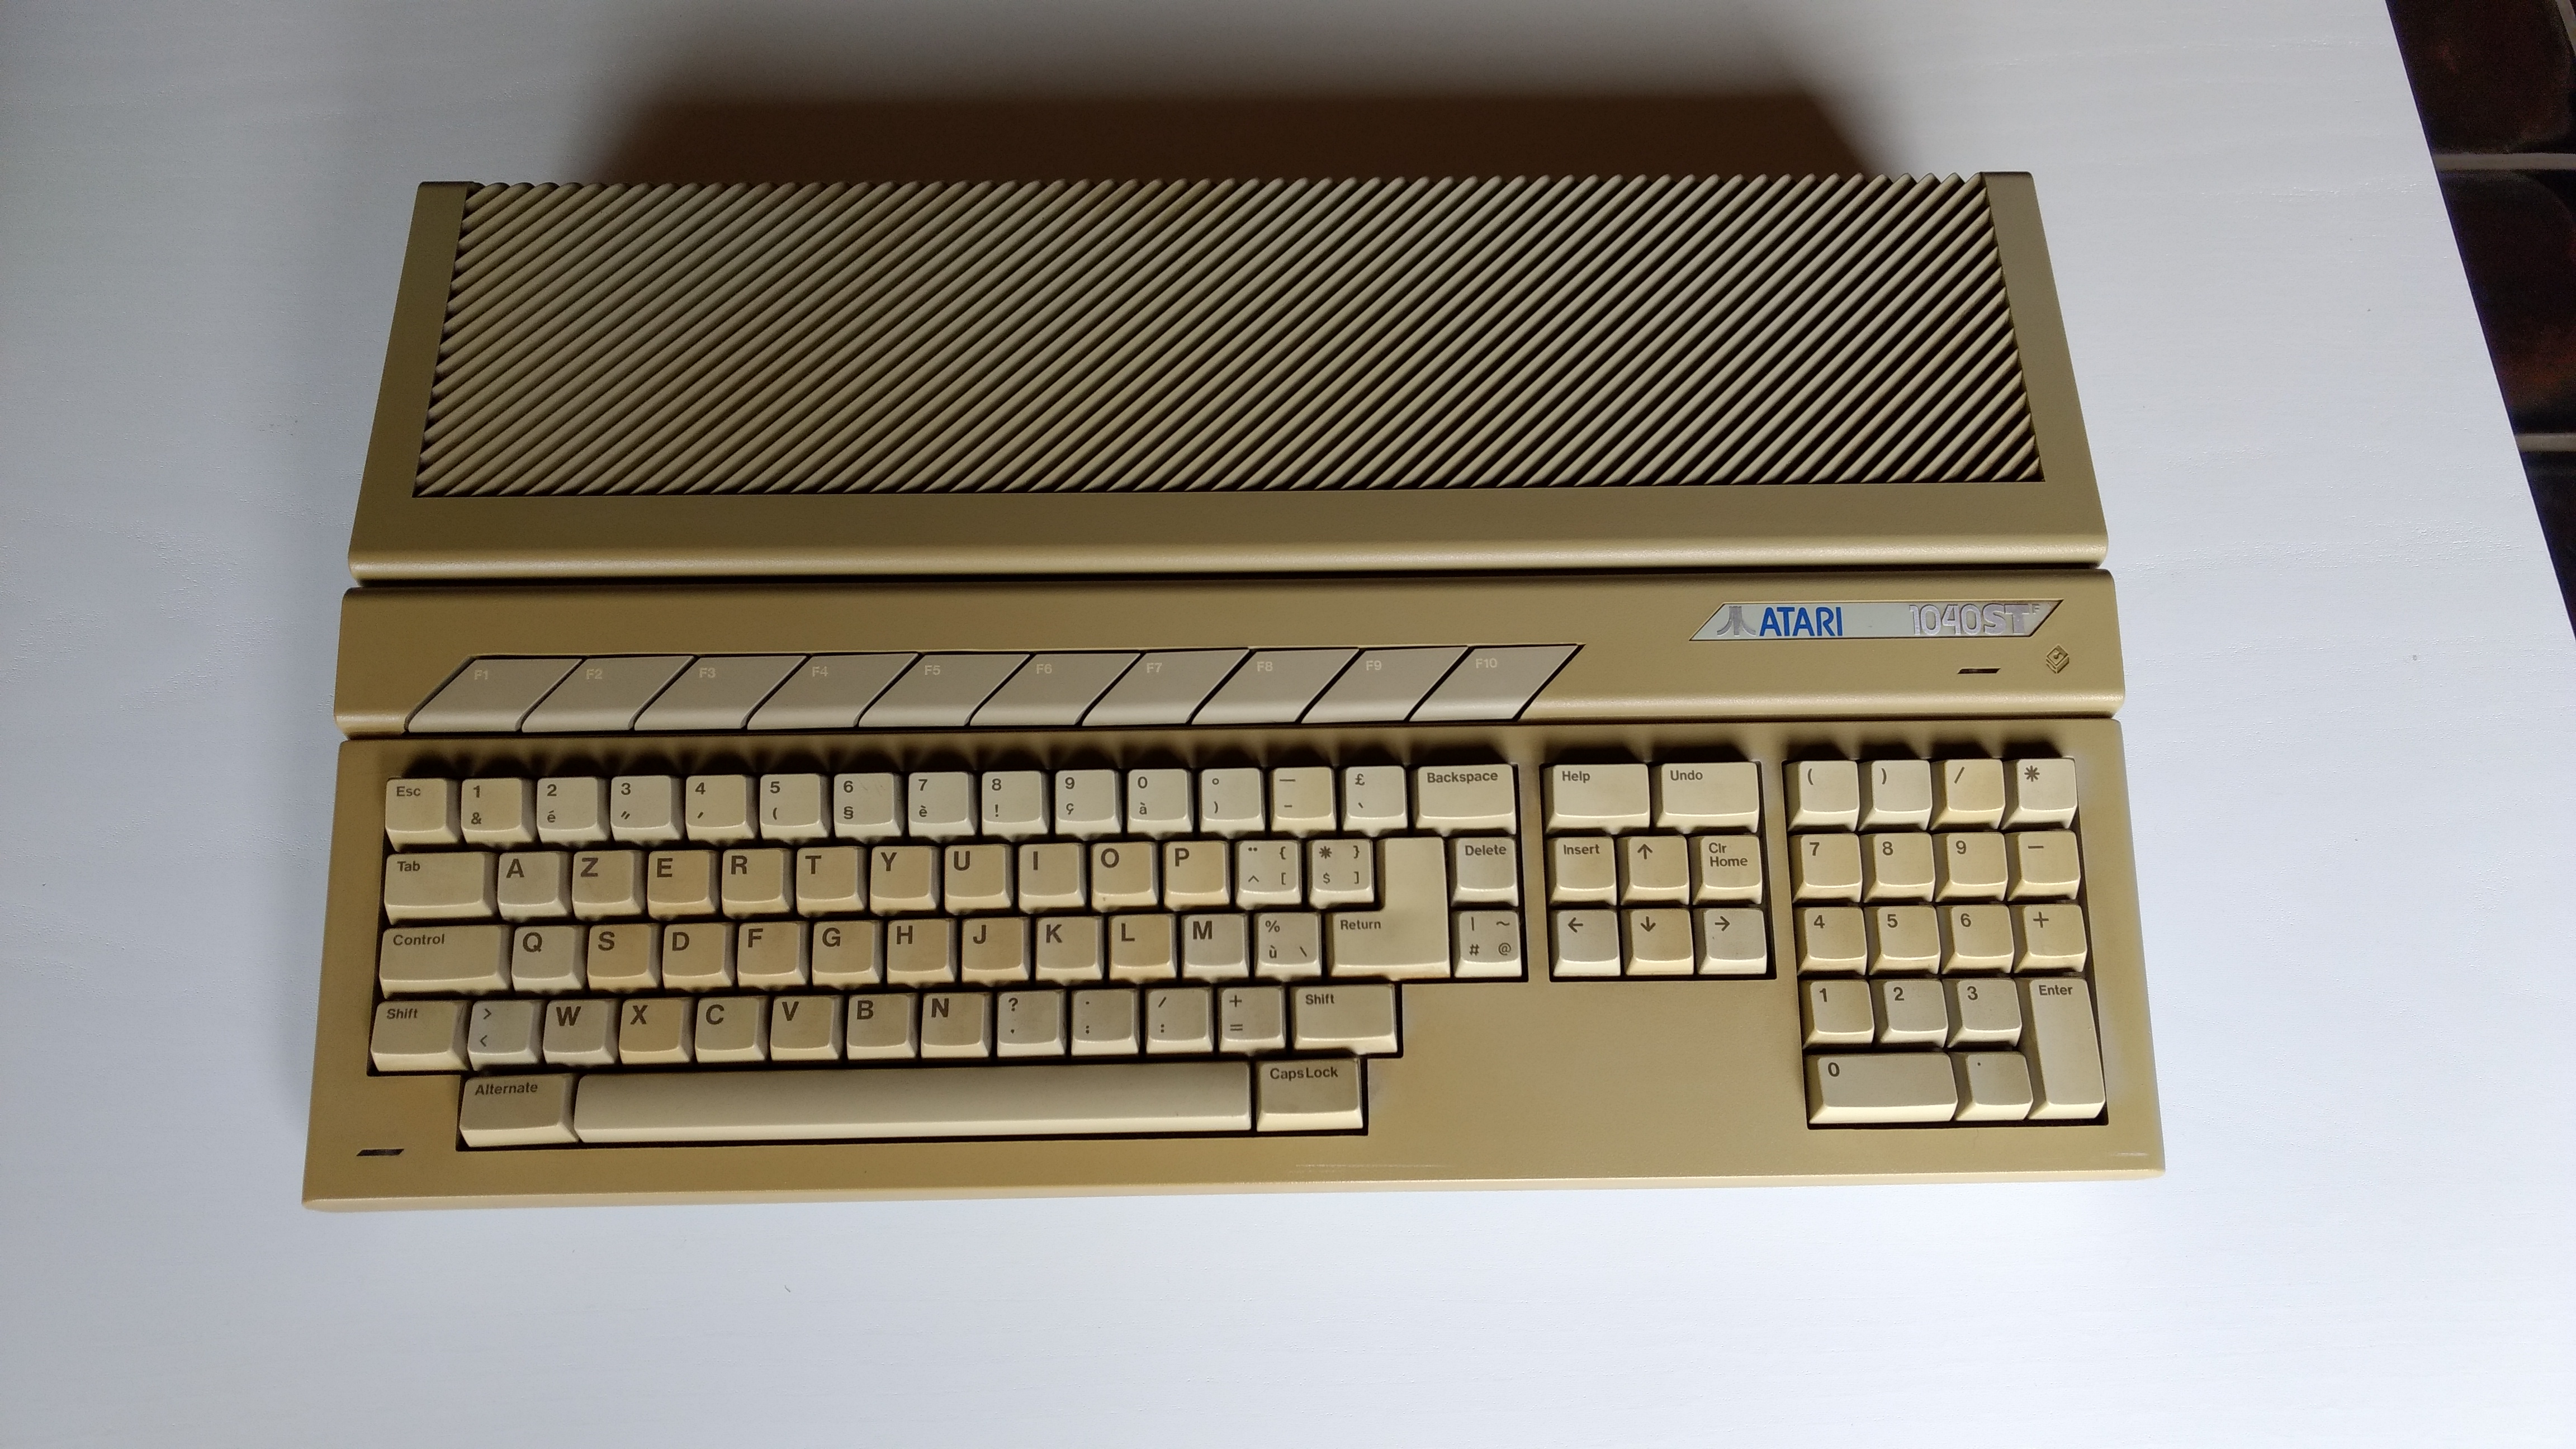  The second project. A French STf. Notice some keys are more yellow than others. 